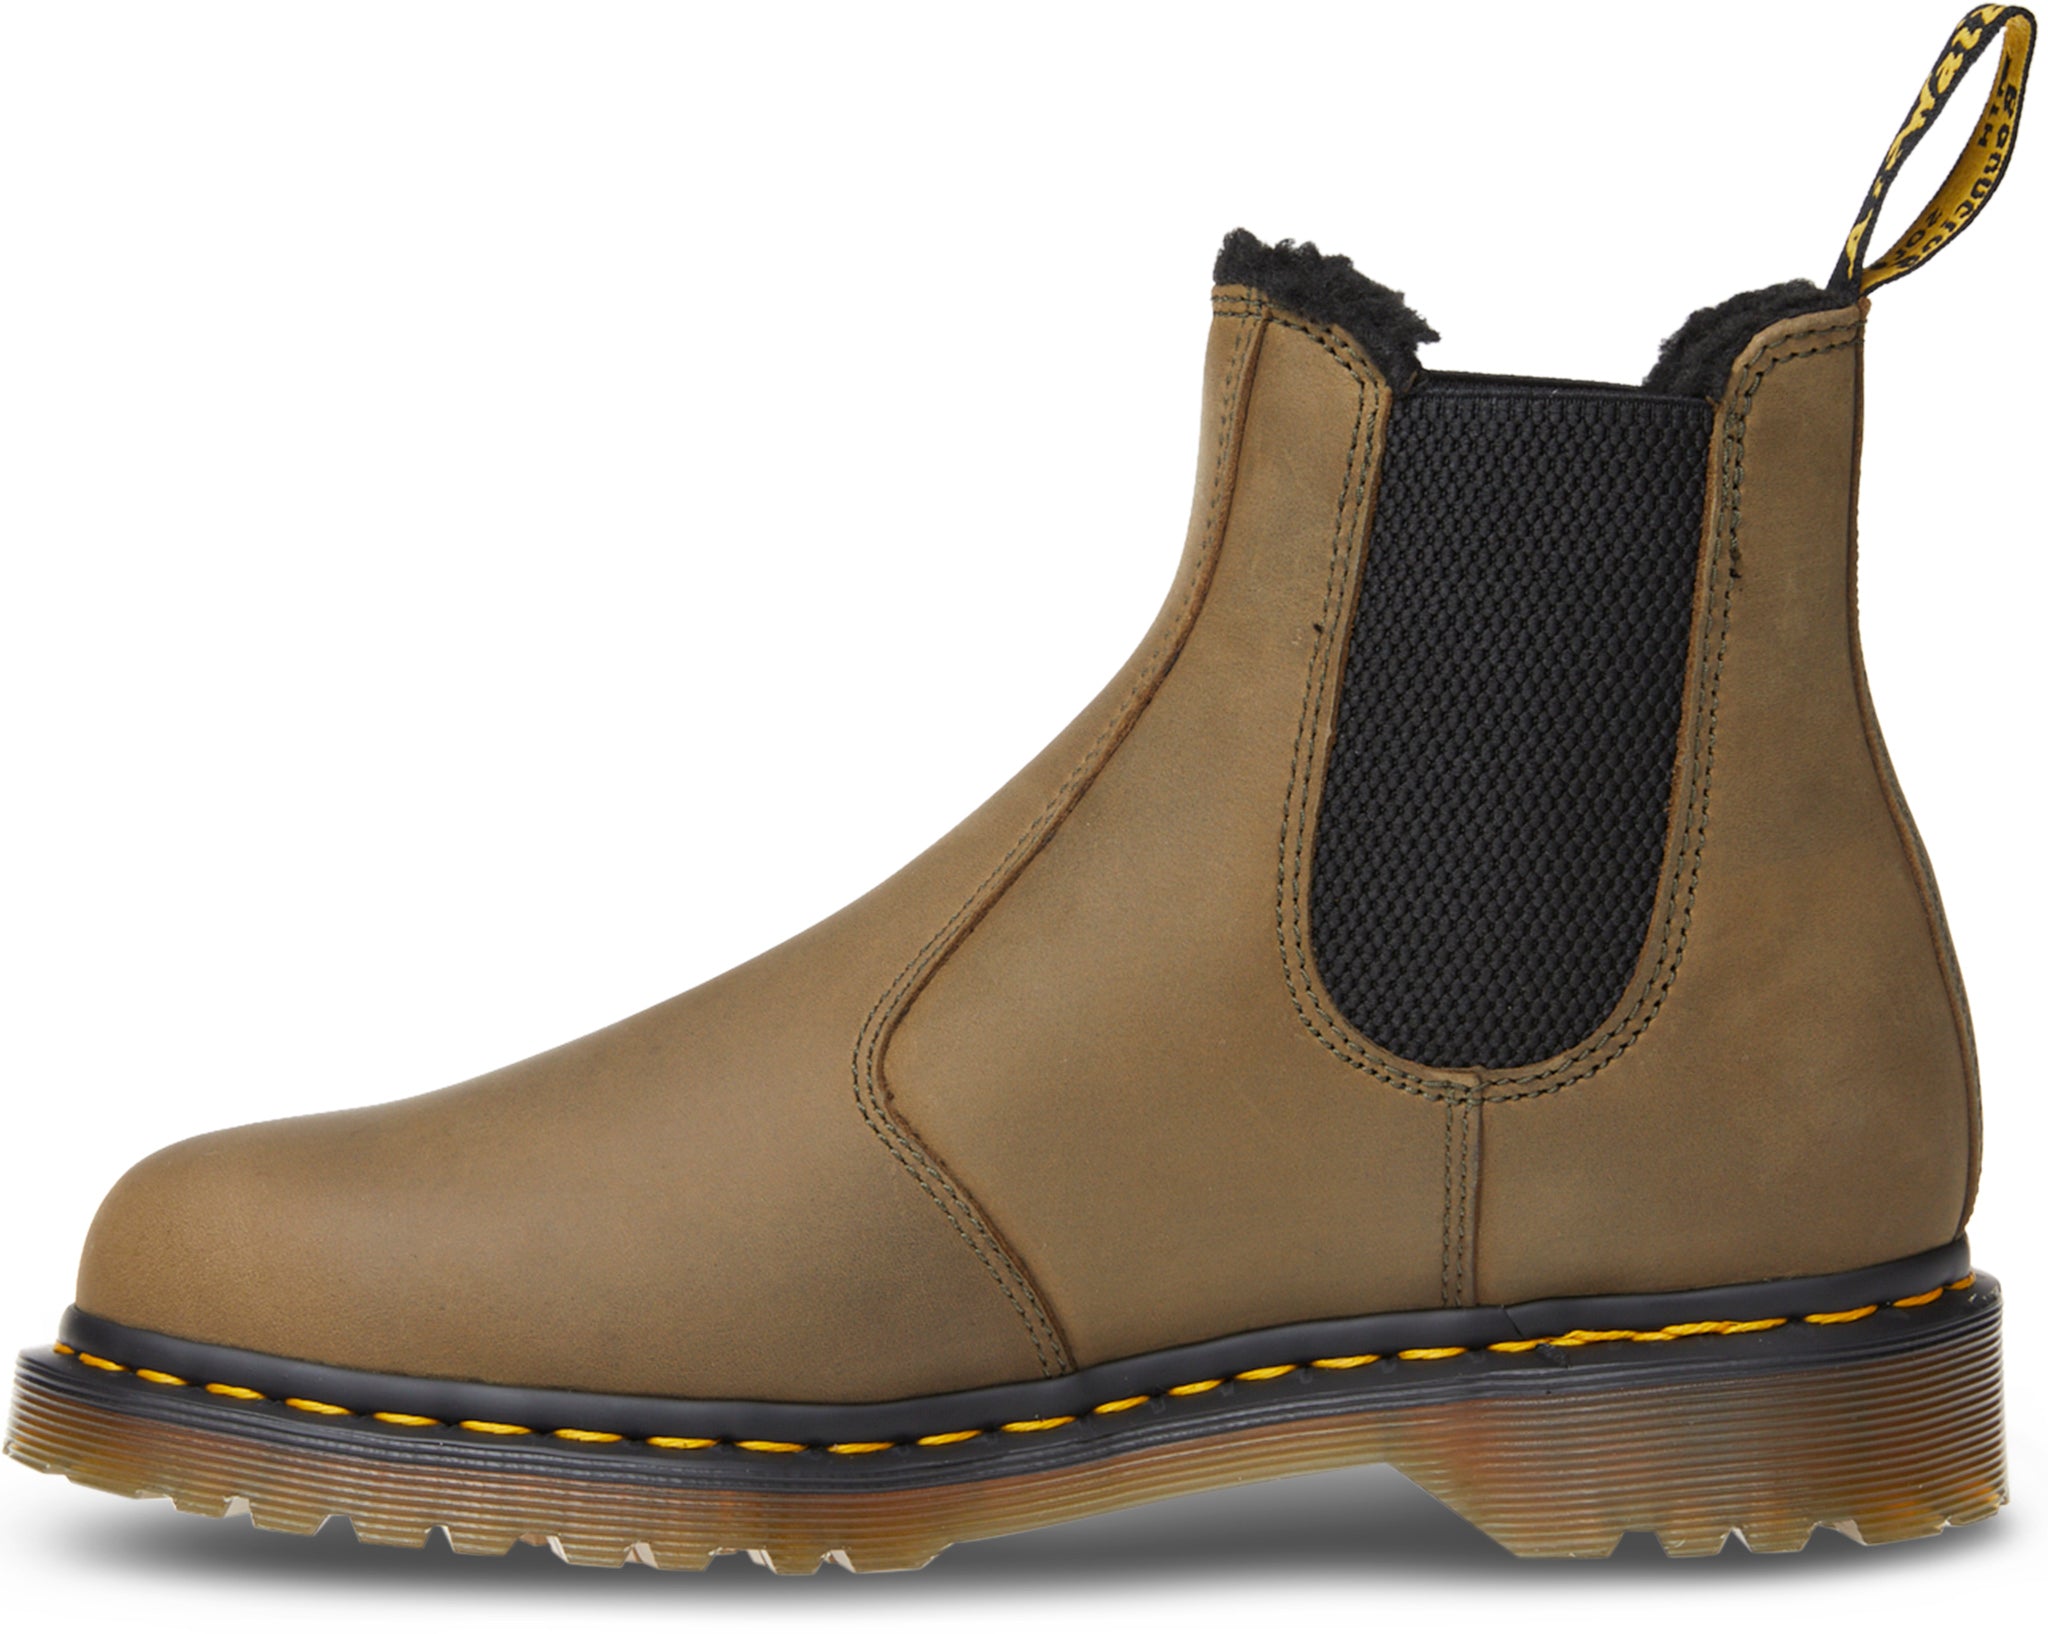 Black Leather Chelsea Boots with Olive Pants Smart Casual Fall